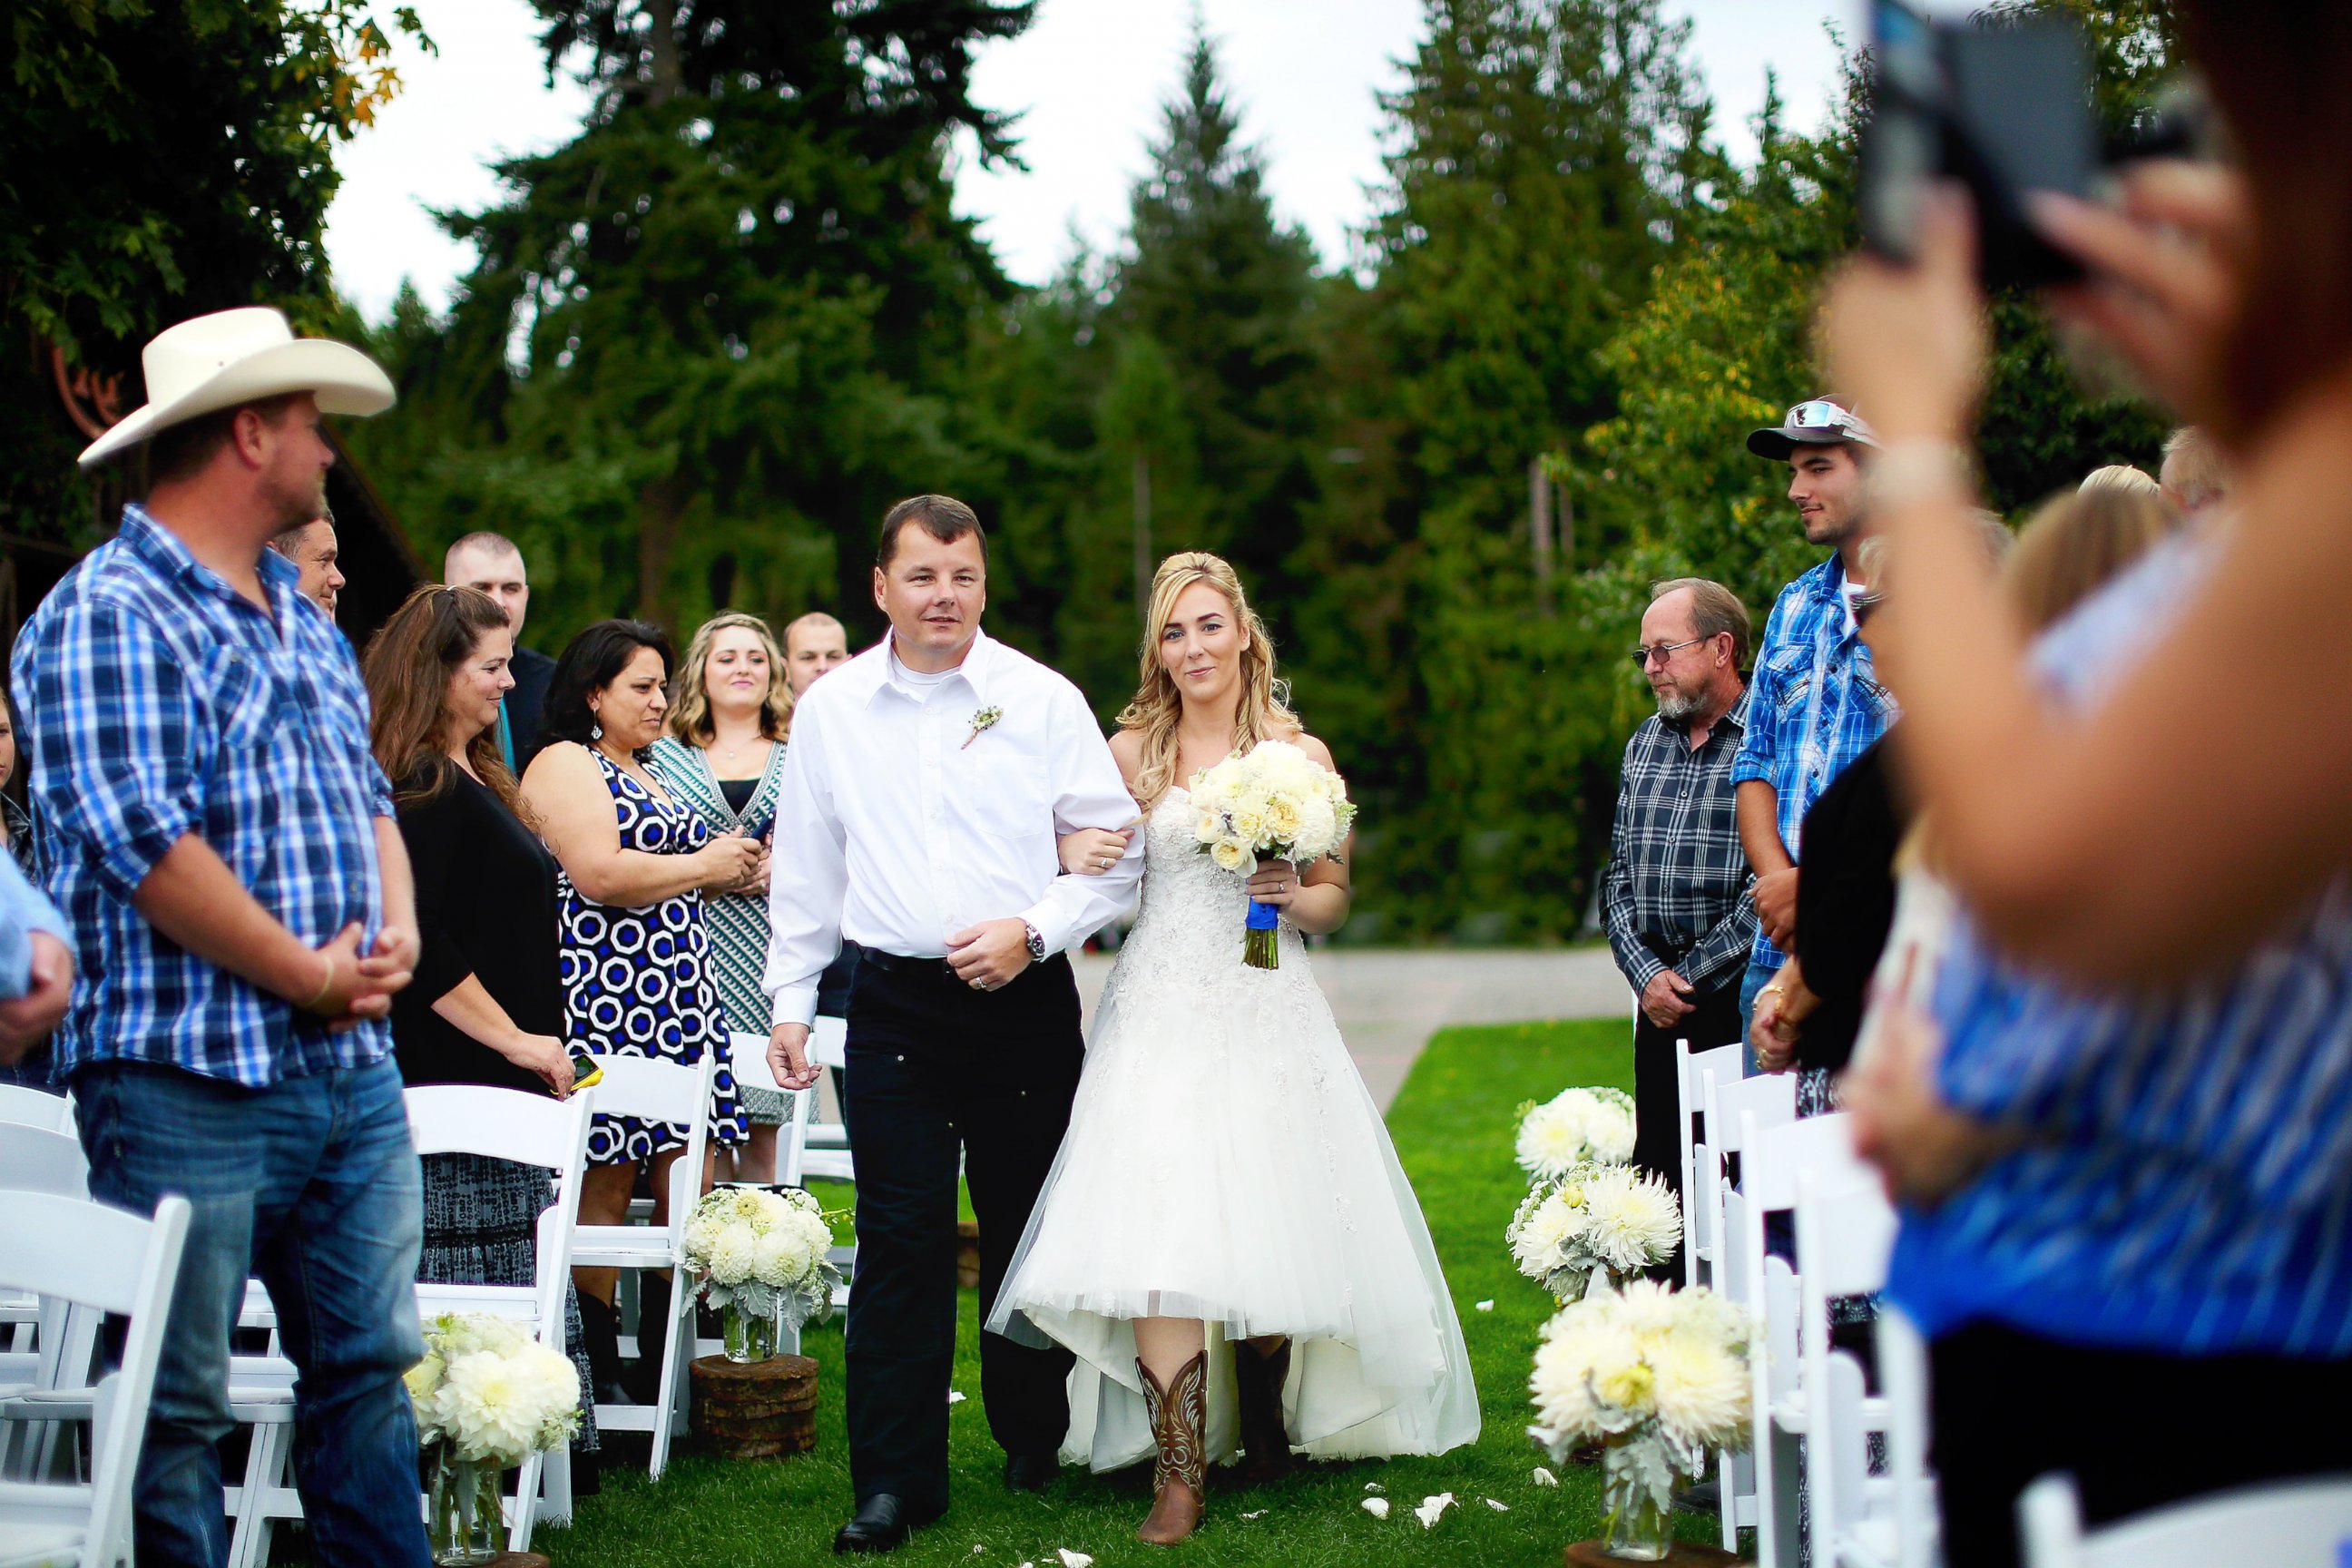 PHOTO: Angela Lyons Photography provided this photo to ABC News from Kirsten Mundell's wedding day.